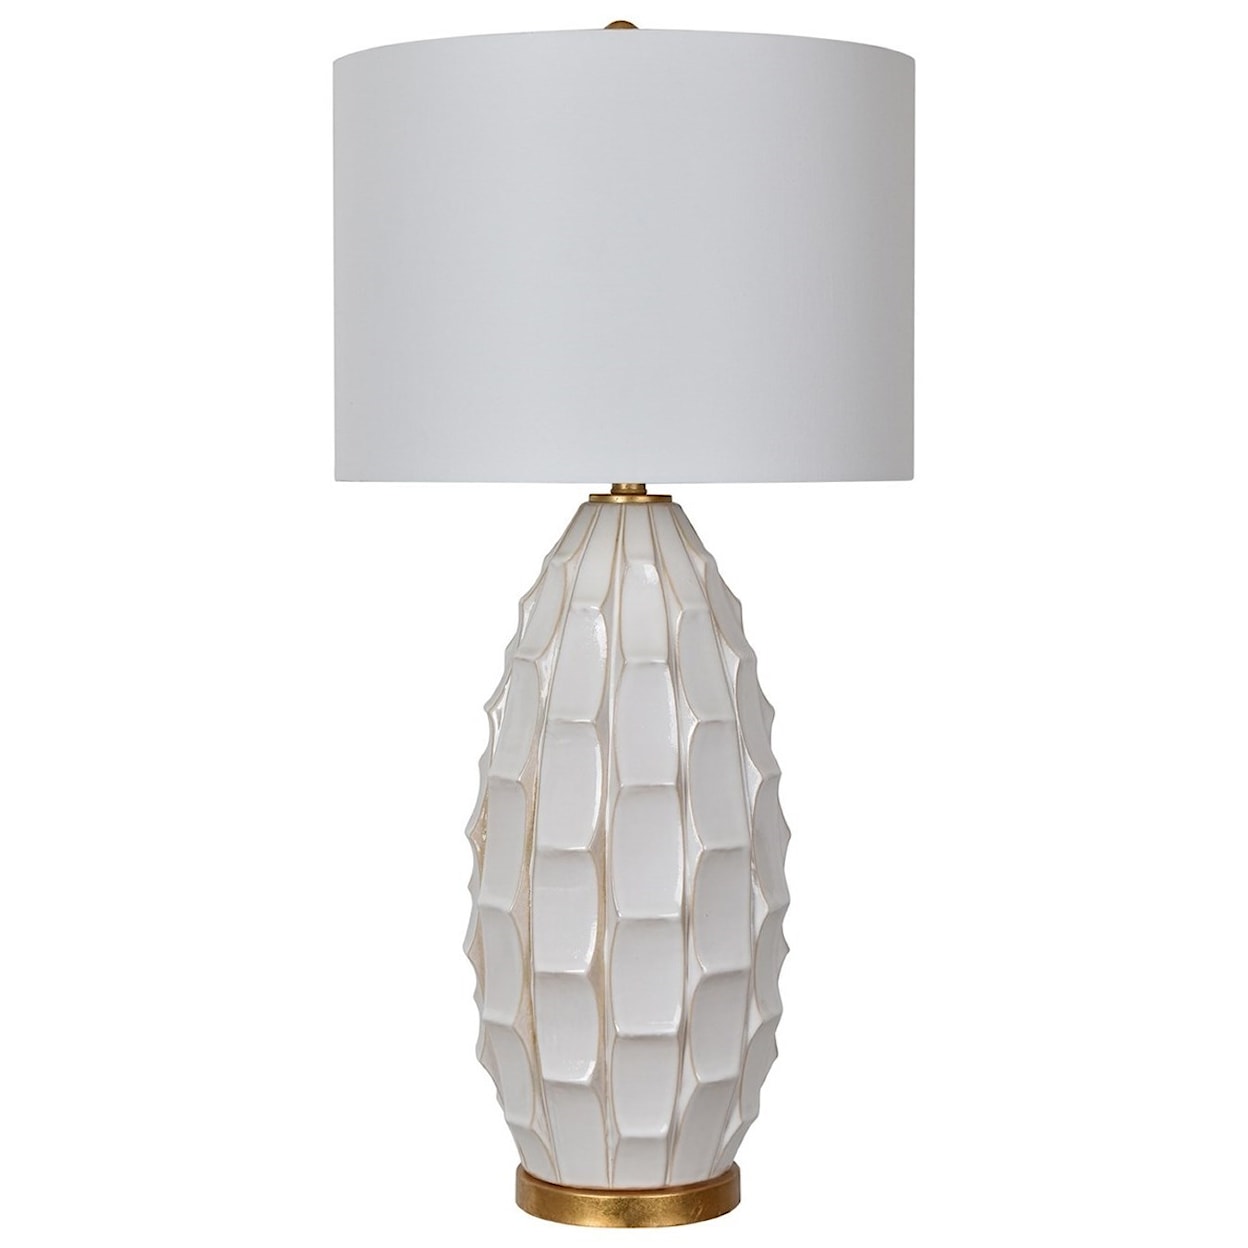 Crestview Collection Lighting Cambridge Table Lamp